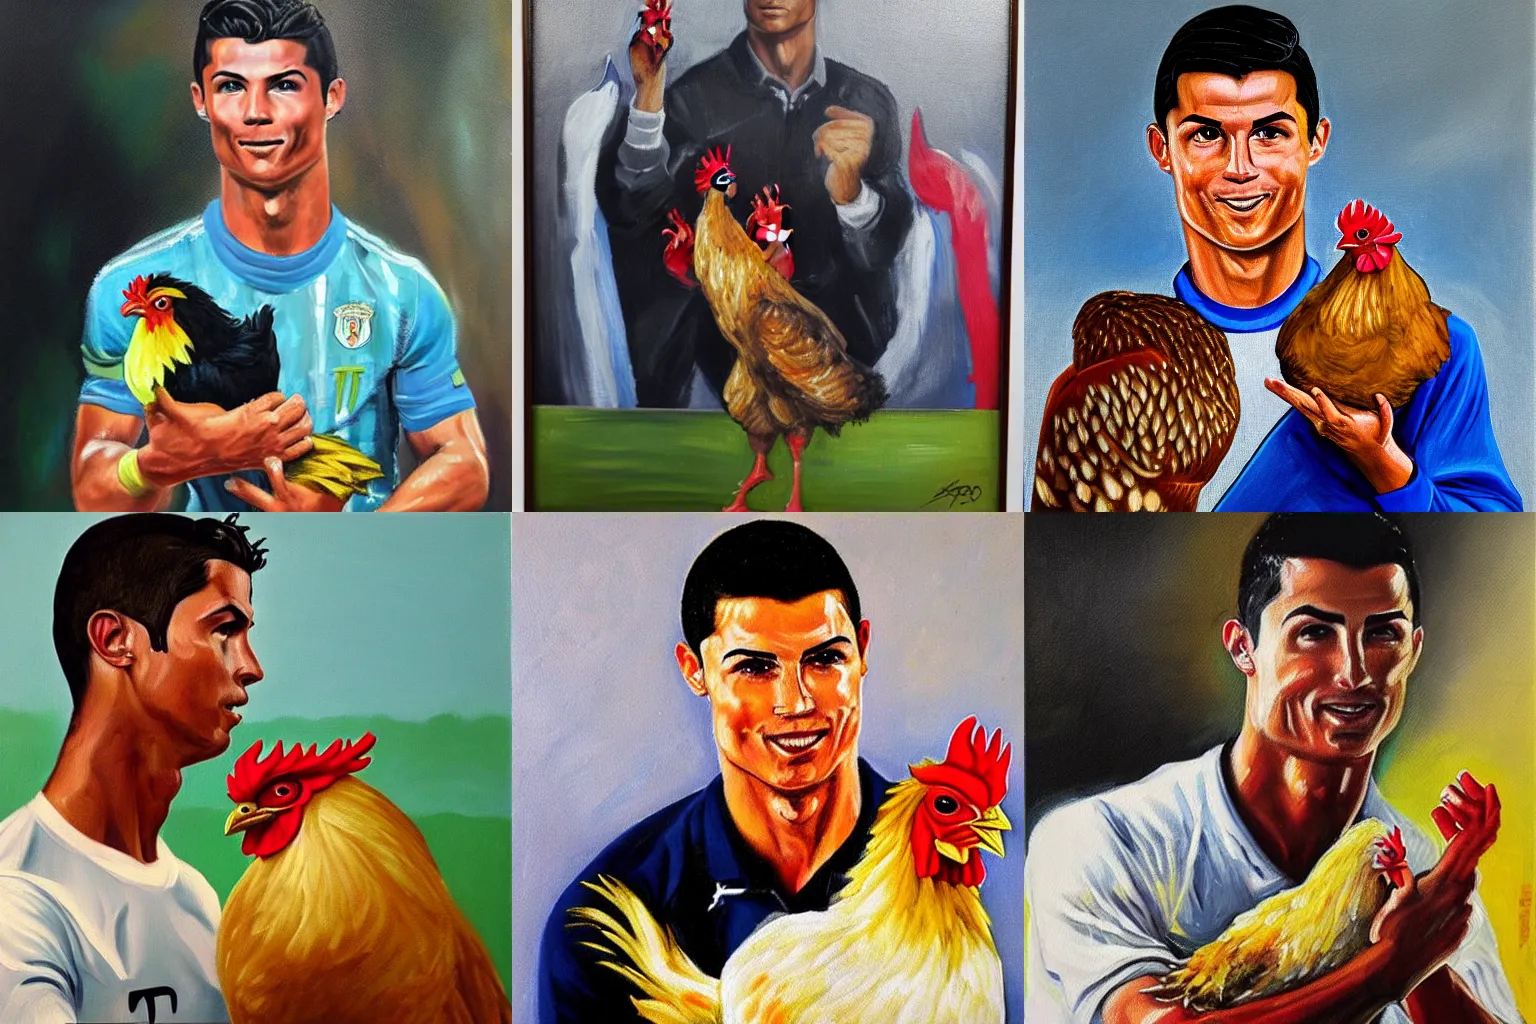 Prompt: Cristiano ronaldo holding a chicken, oil painting from the 1980s